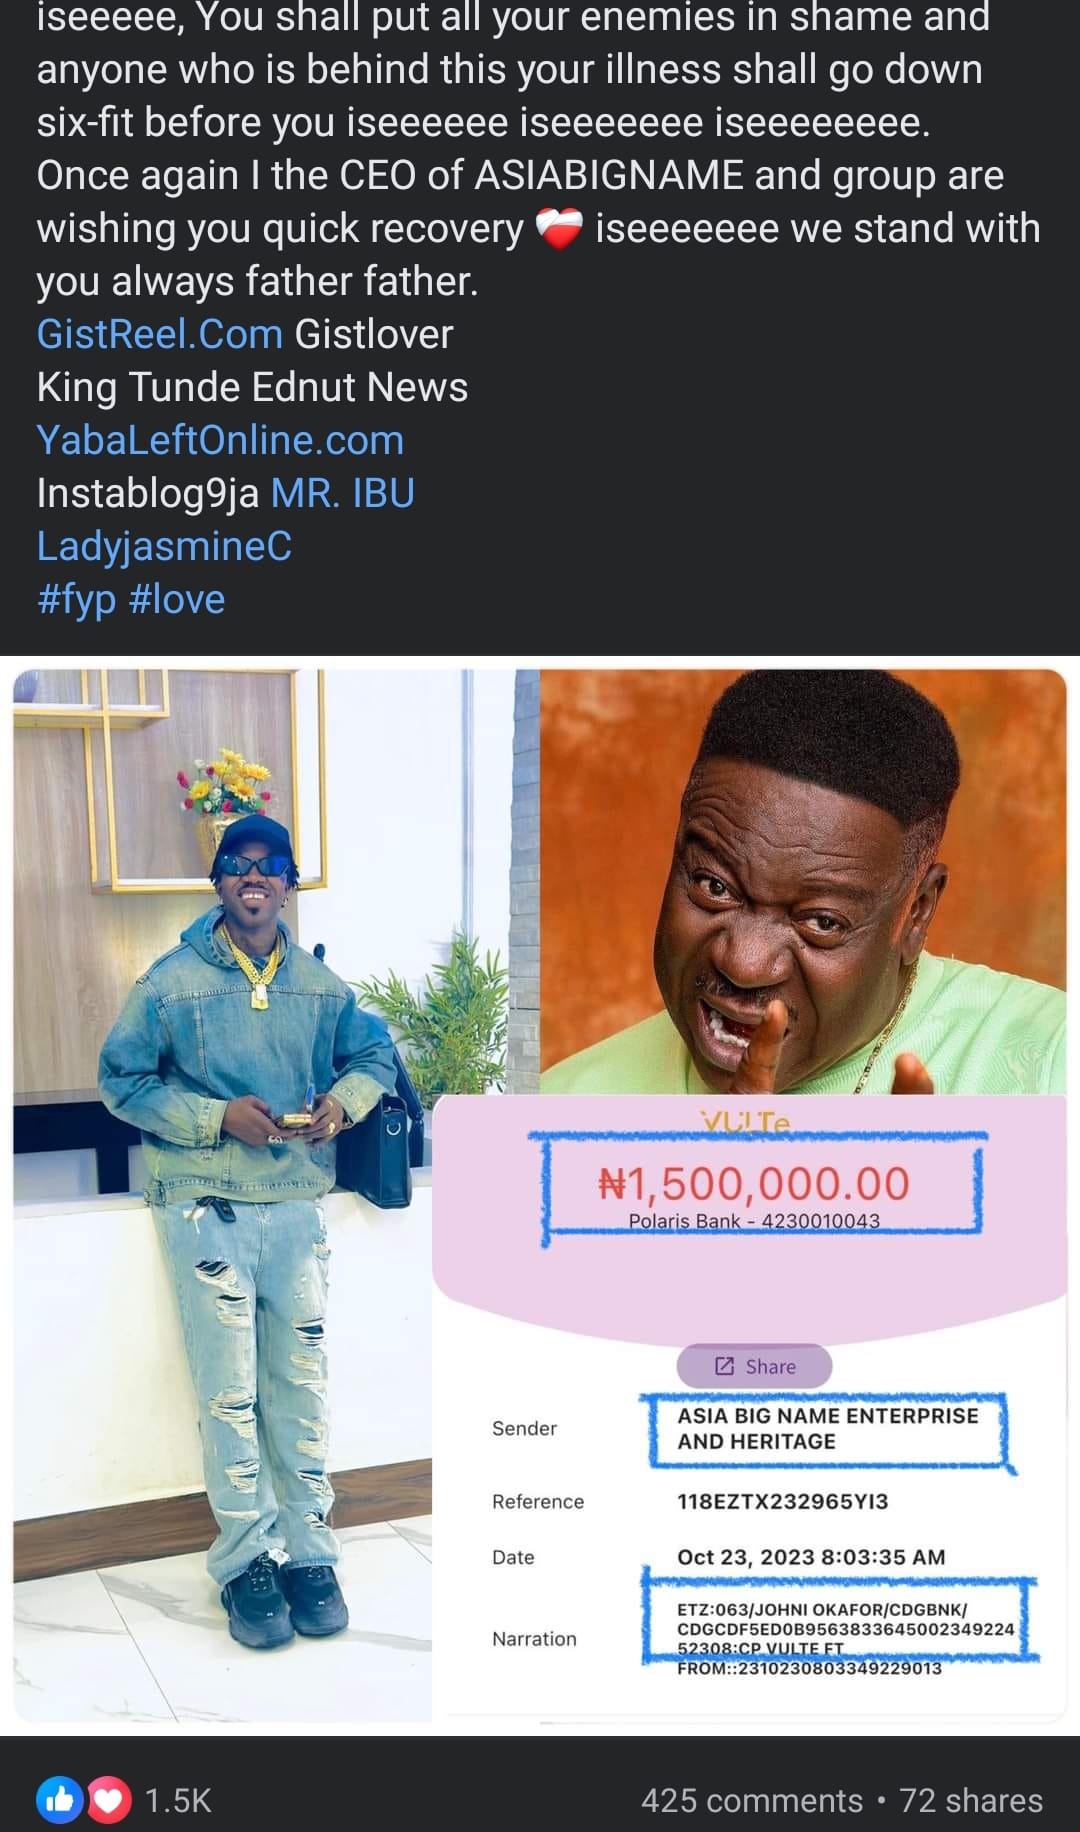 “I have fulfilled my pledge” – Nigerian man says, shares receipts of ₦1.5 million paid for Mr. Ibu’s medical bills